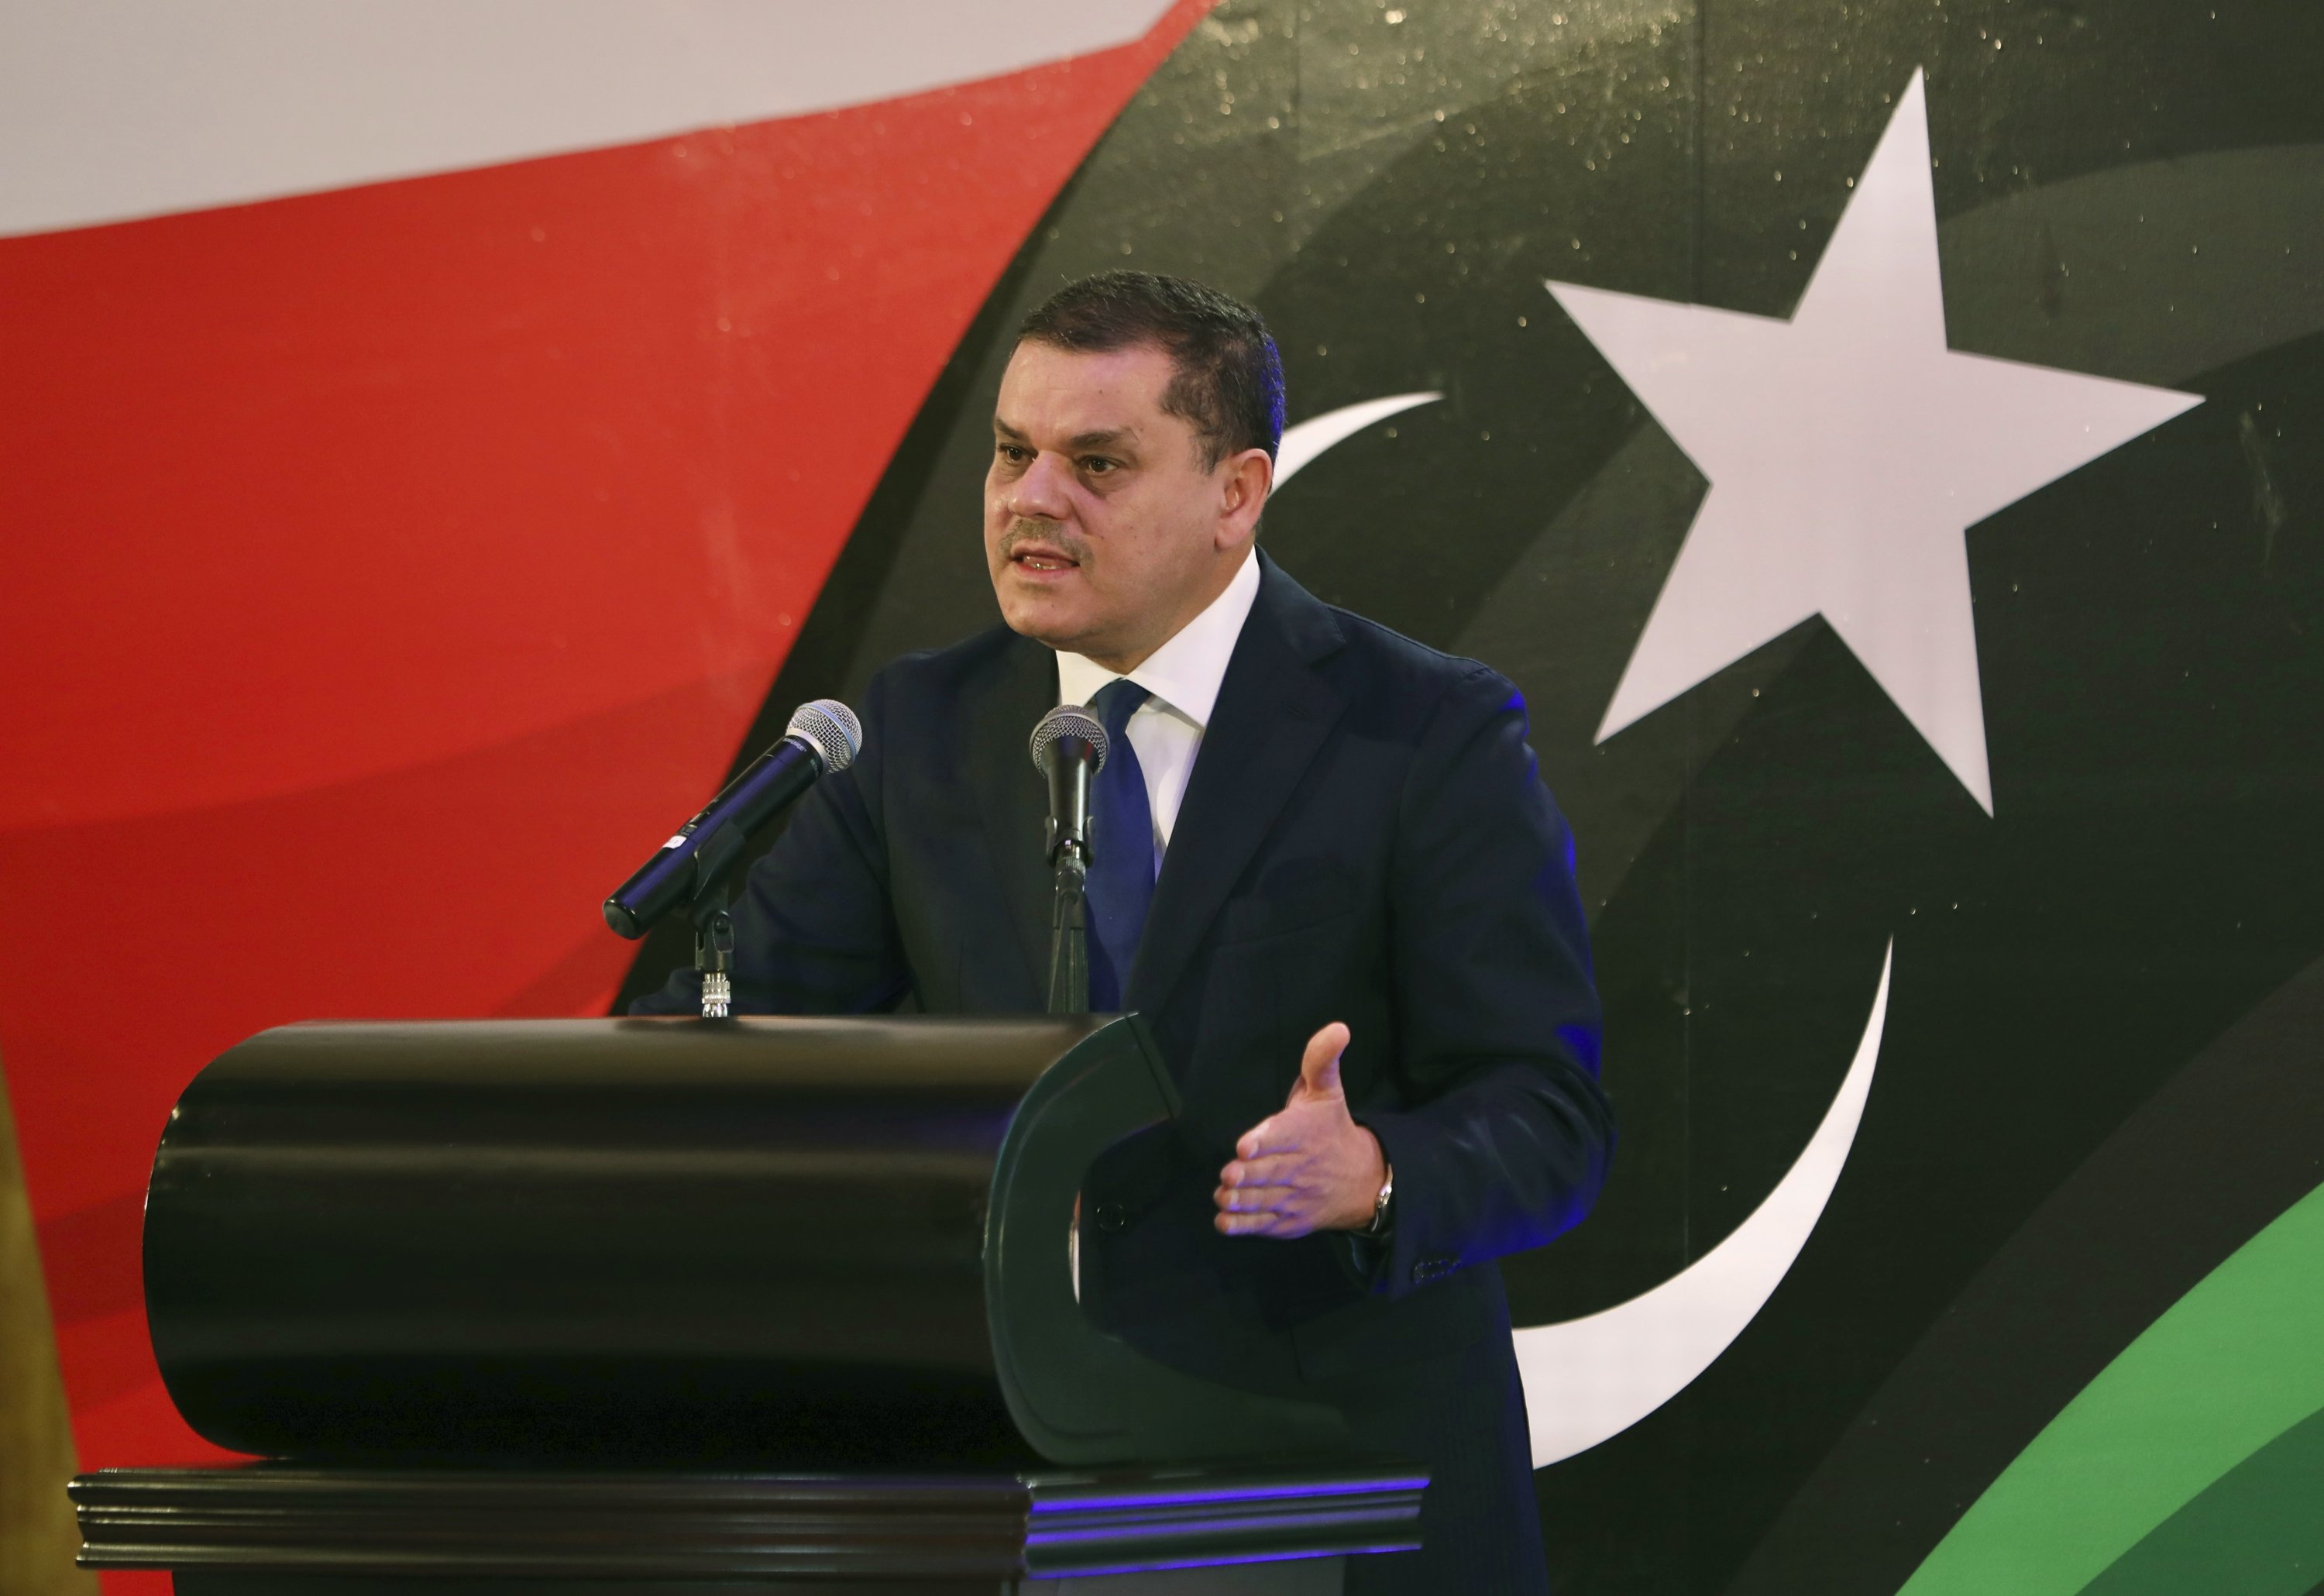 Deal with Turkey in favor of Libya, PM Dbeibah says | Daily Sabah